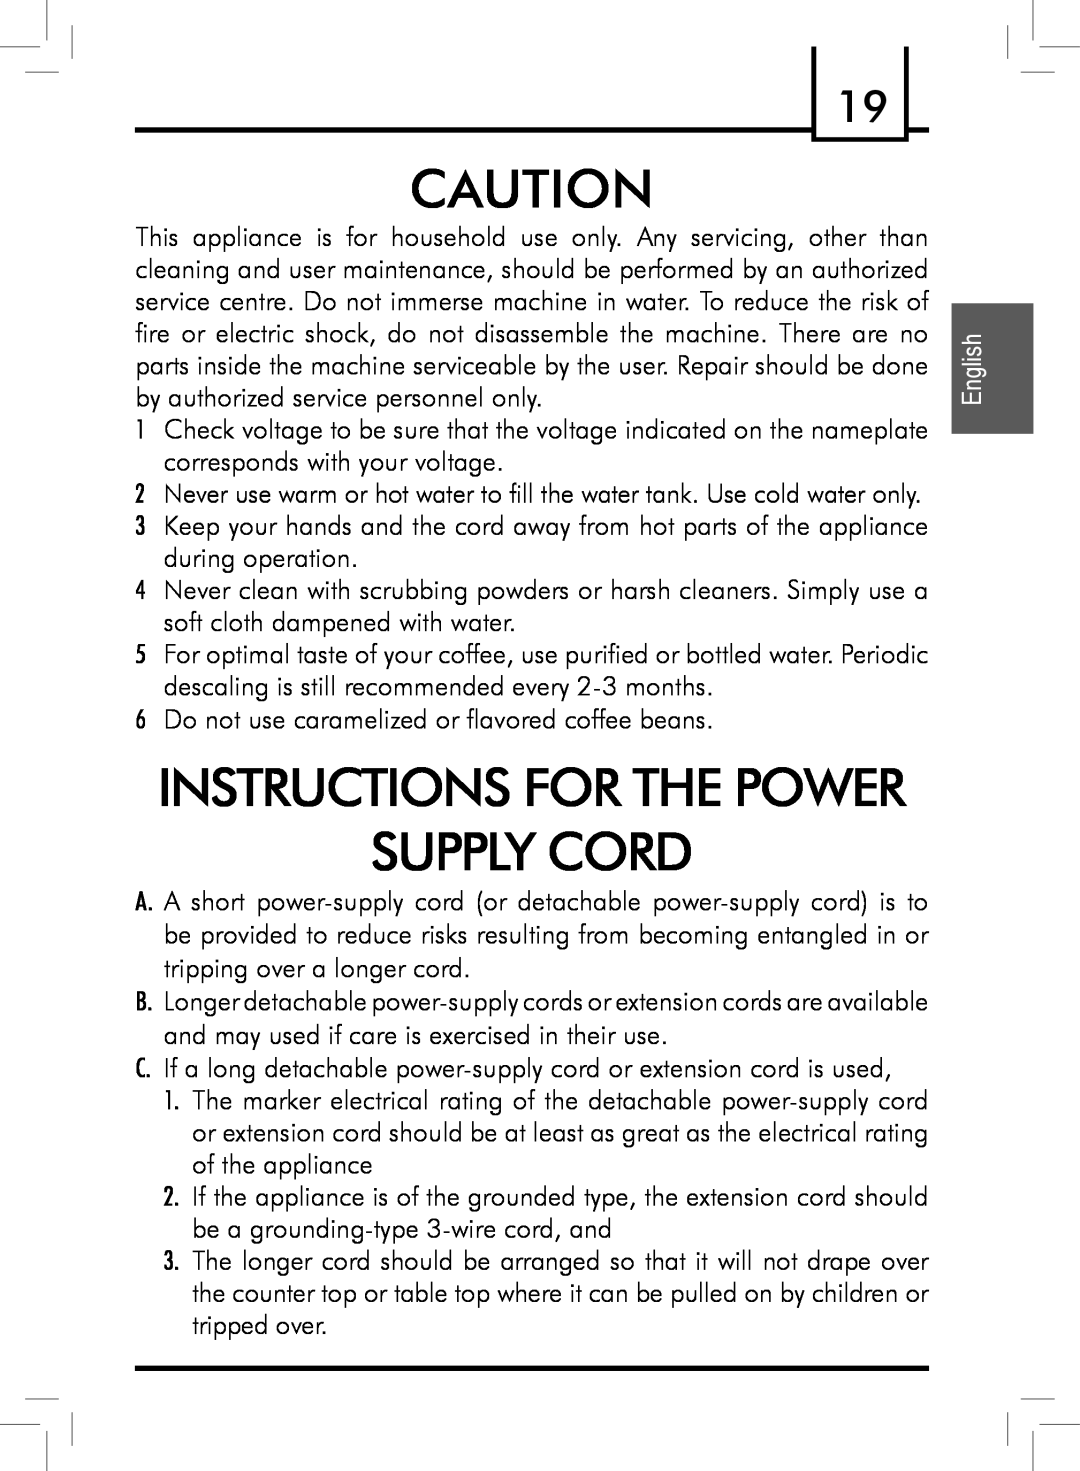 Saeco Coffee Makers PLUS manual Supply Cord, Instructions For The Power, English 